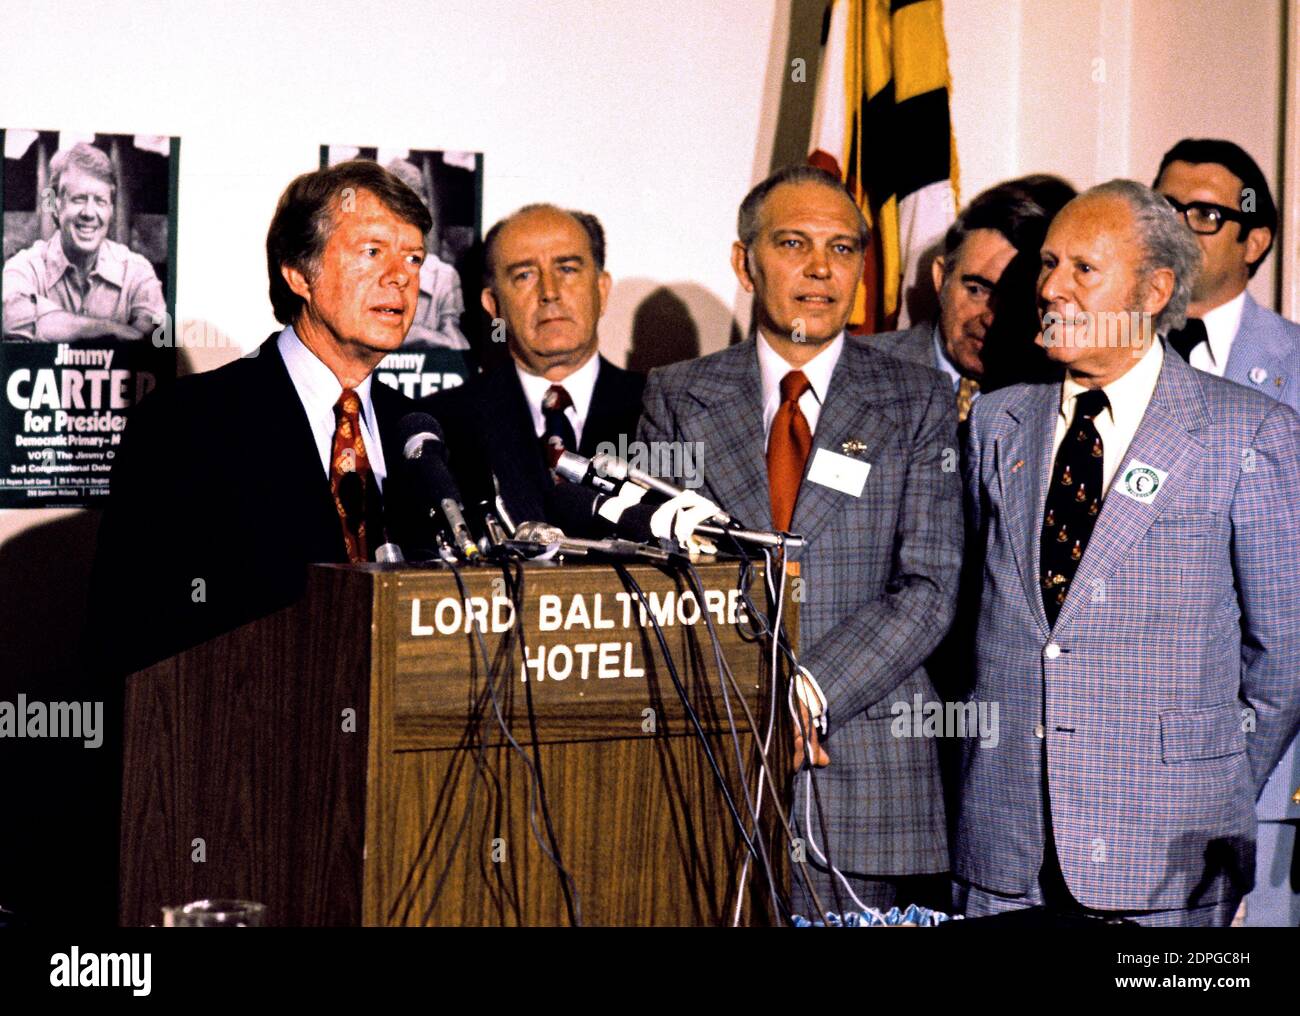 Governor Jimmy Carter (Democrat of Georgia) a candidate for the 1976 Democratic nomination for President of the United States, makes a campaign appearance in Baltimore, Maryland on May 13, 1976. From left to right: Mayor William Donald Schaefer (Democrat of Baltimore); Secretary of State Fred L. Wineland (Democrat of Maryland); and Comptroller Louis L. Goldstein (Democrat of Maryland). Photo by Arnie Sachs/CNP/ABACAPRESS.COM Stock Photo